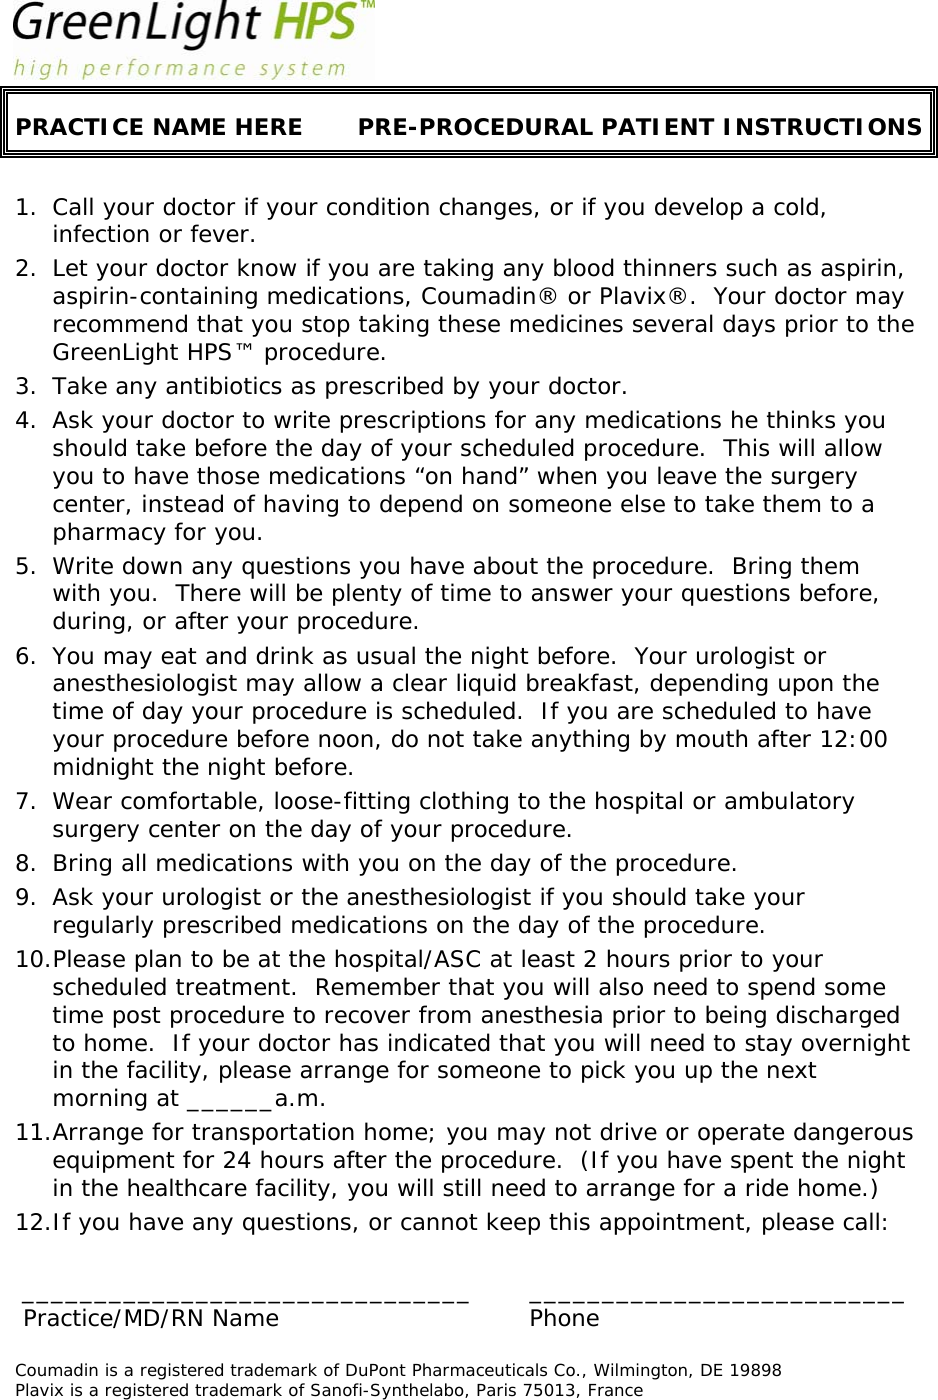  PRACTICE NAME HERE  PRE-PROCEDURAL PATIENT INSTRUCTIONS  1. Call your doctor if your condition changes, or if you develop a cold, infection or fever. 2. Let your doctor know if you are taking any blood thinners such as aspirin, aspirin-containing medications, Coumadin® or Plavix®.  Your doctor may recommend that you stop taking these medicines several days prior to the GreenLight HPS™ procedure. 3. Take any antibiotics as prescribed by your doctor. 4. Ask your doctor to write prescriptions for any medications he thinks you should take before the day of your scheduled procedure.  This will allow you to have those medications “on hand” when you leave the surgery center, instead of having to depend on someone else to take them to a pharmacy for you. 5. Write down any questions you have about the procedure.  Bring them with you.  There will be plenty of time to answer your questions before, during, or after your procedure. 6. You may eat and drink as usual the night before.  Your urologist or anesthesiologist may allow a clear liquid breakfast, depending upon the time of day your procedure is scheduled.  If you are scheduled to have your procedure before noon, do not take anything by mouth after 12:00 midnight the night before. 7. Wear comfortable, loose-fitting clothing to the hospital or ambulatory surgery center on the day of your procedure.   8. Bring all medications with you on the day of the procedure. 9. Ask your urologist or the anesthesiologist if you should take your regularly prescribed medications on the day of the procedure.  10.Please plan to be at the hospital/ASC at least 2 hours prior to your scheduled treatment.  Remember that you will also need to spend some time post procedure to recover from anesthesia prior to being discharged to home.  If your doctor has indicated that you will need to stay overnight in the facility, please arrange for someone to pick you up the next morning at ______a.m. 11.Arrange for transportation home; you may not drive or operate dangerous equipment for 24 hours after the procedure.  (If you have spent the night in the healthcare facility, you will still need to arrange for a ride home.) 12.If you have any questions, or cannot keep this appointment, please call:  _______________________________ __________________________   Practice/MD/RN Name   Phone  Coumadin is a registered trademark of DuPont Pharmaceuticals Co., Wilmington, DE 19898  Plavix is a registered trademark of Sanofi-Synthelabo, Paris 75013, France      